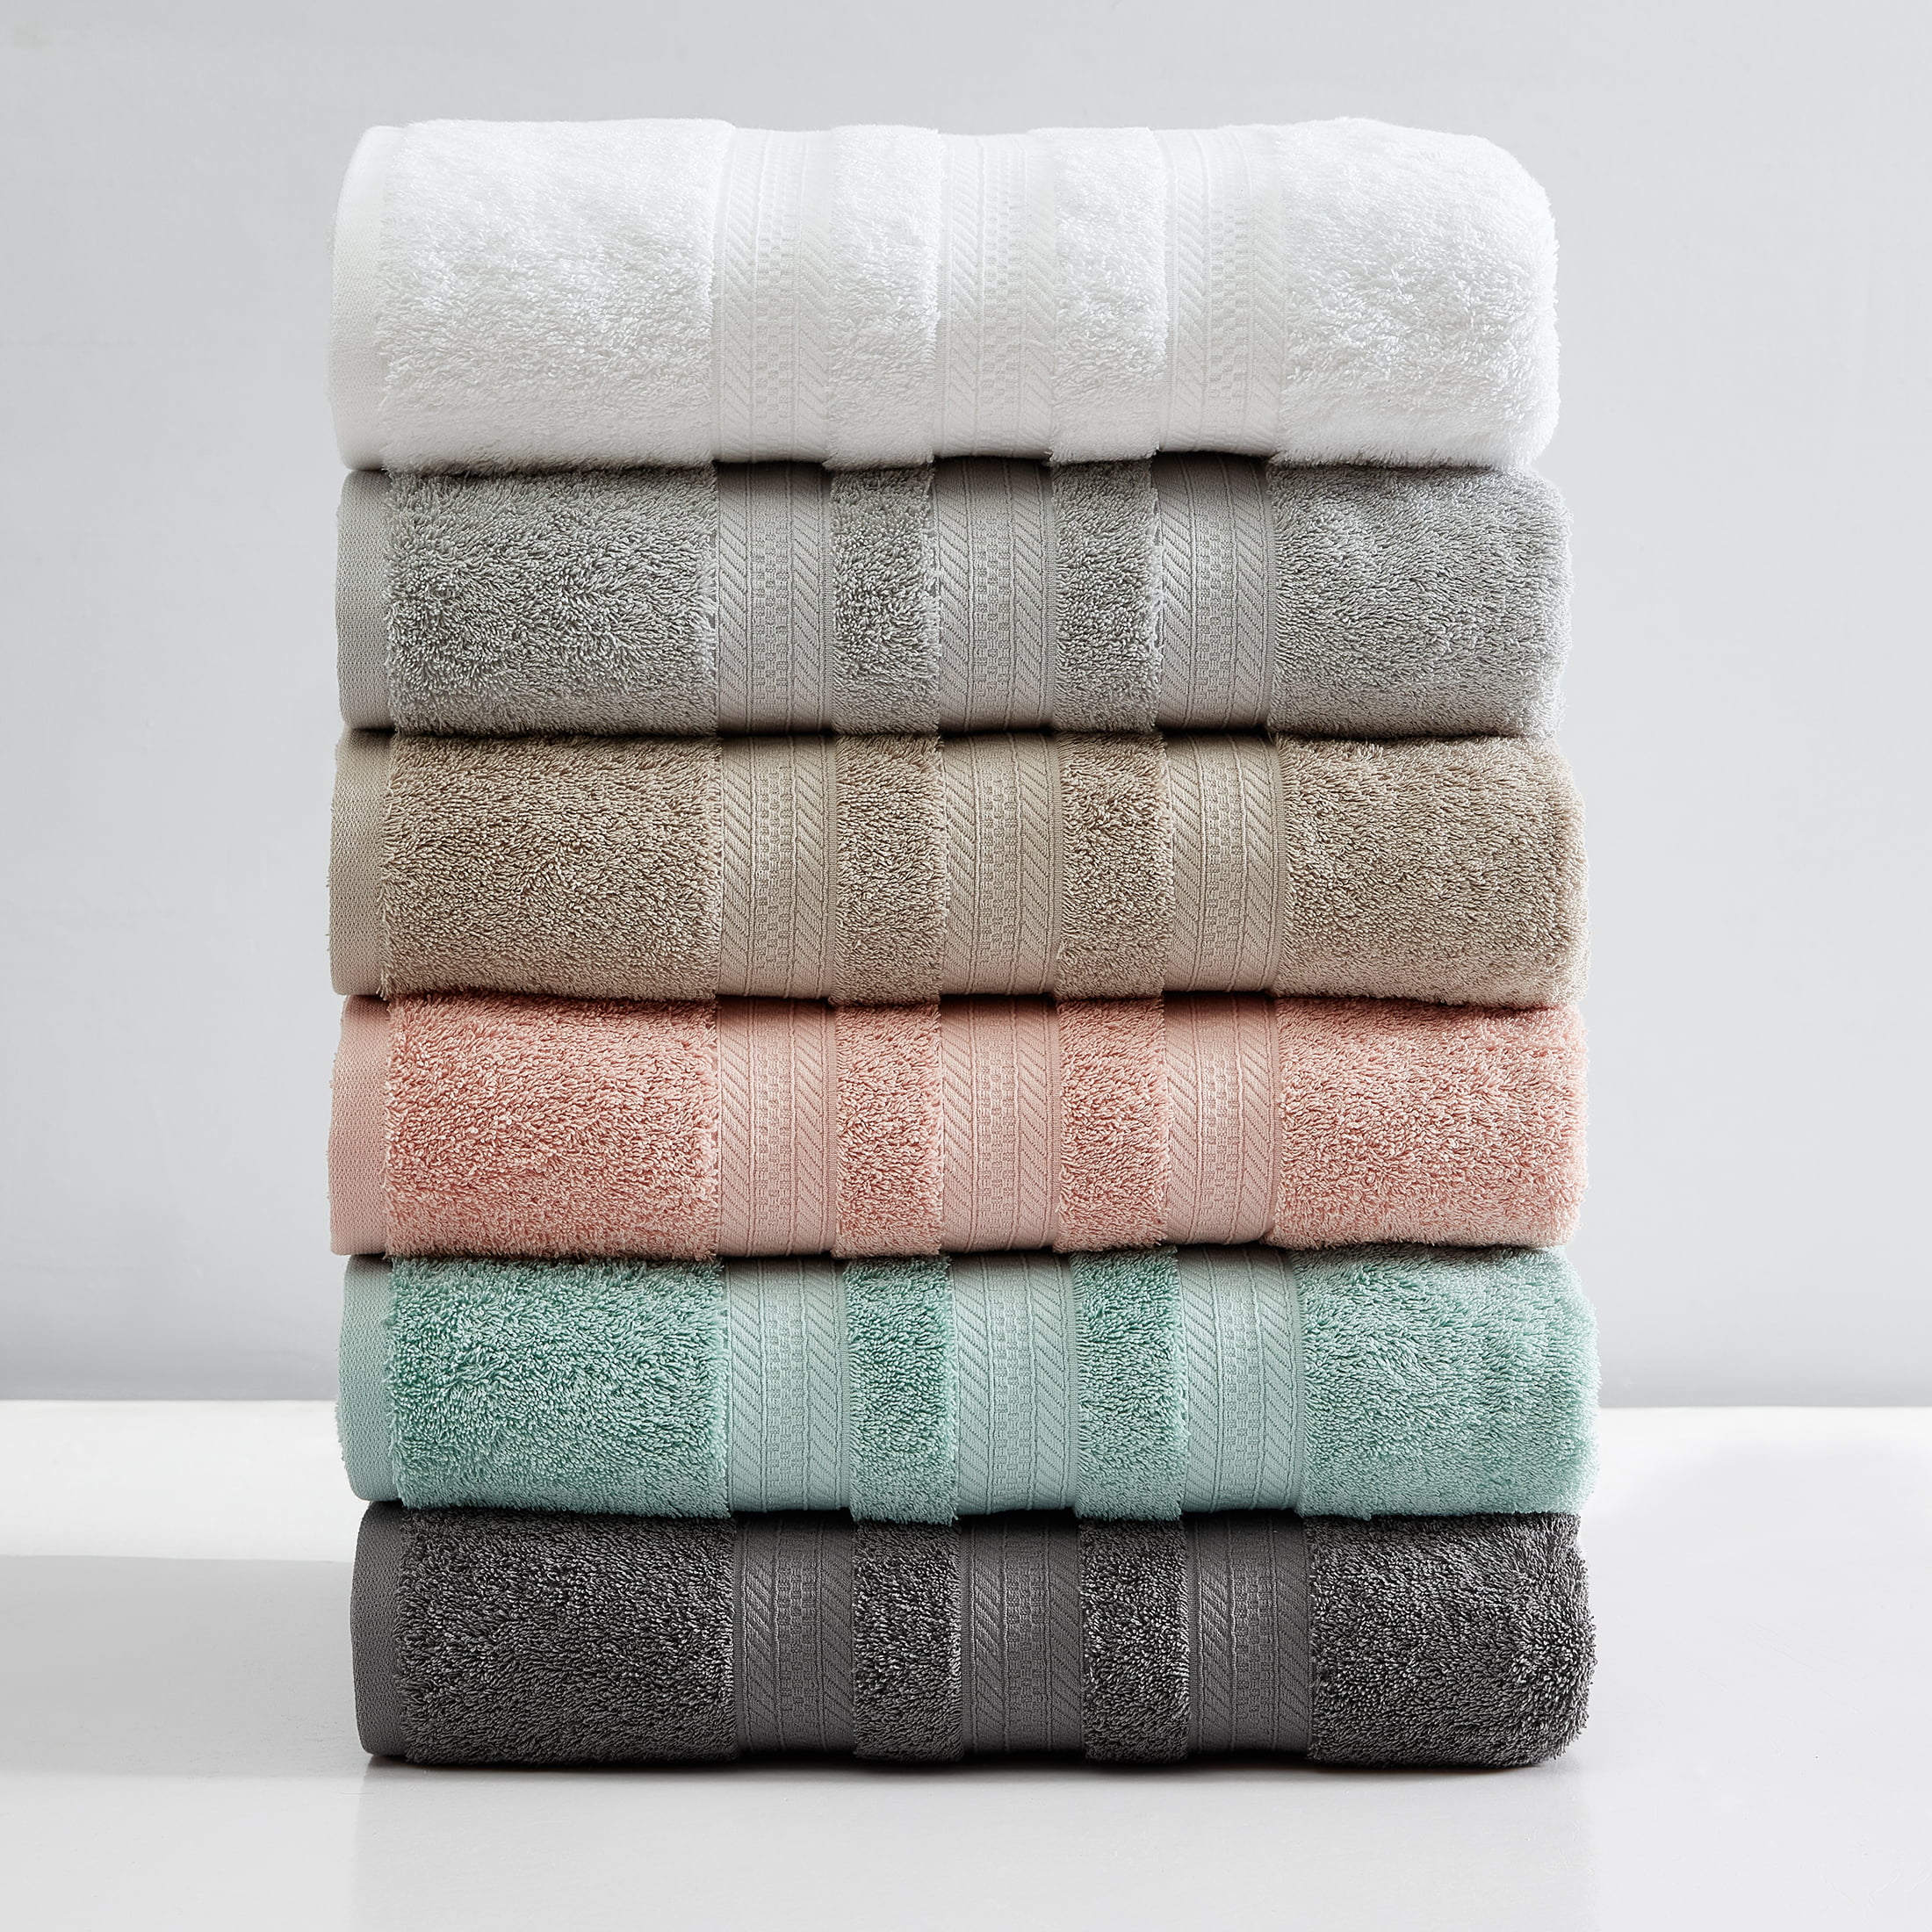  Set of 4 Luxury XL Bath Towels by Bumble - Oversized Bath Towels  Extra Large, Hotel Quality Towels, 650 GSM Soft Combed Cotton, Home Spa Bathroom  Towels, Thick & Fluffy Bath